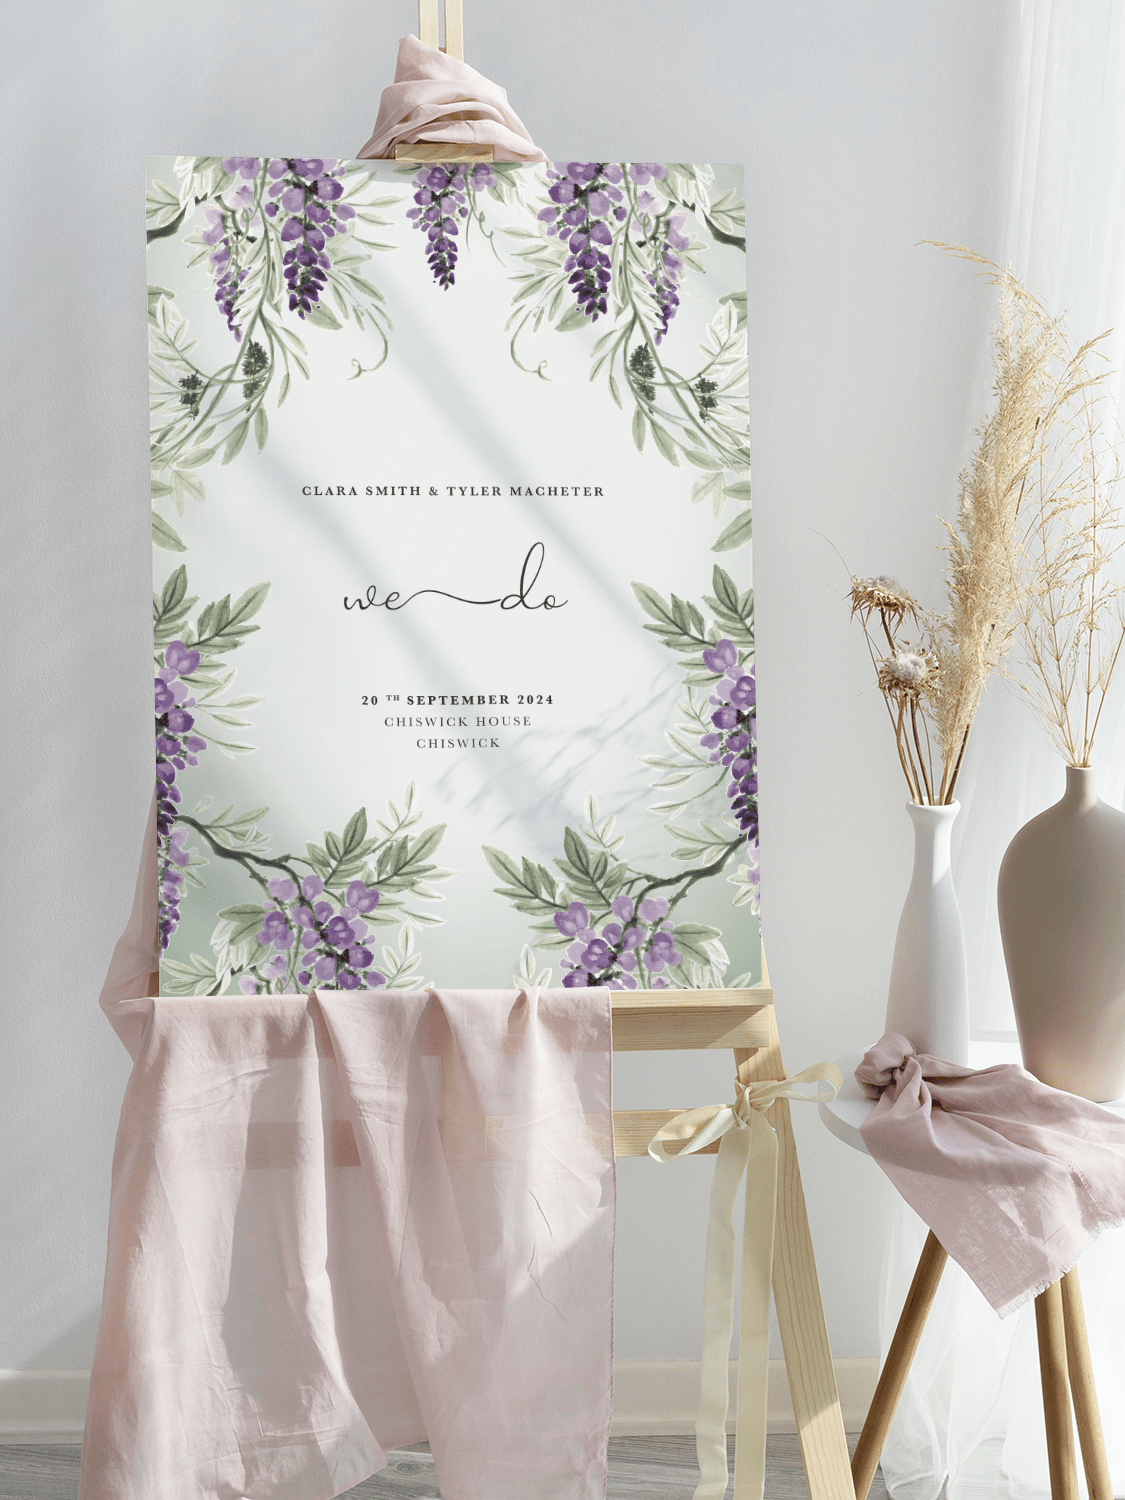 Large Wisteria Falls wedding welcome sign in Garden Green